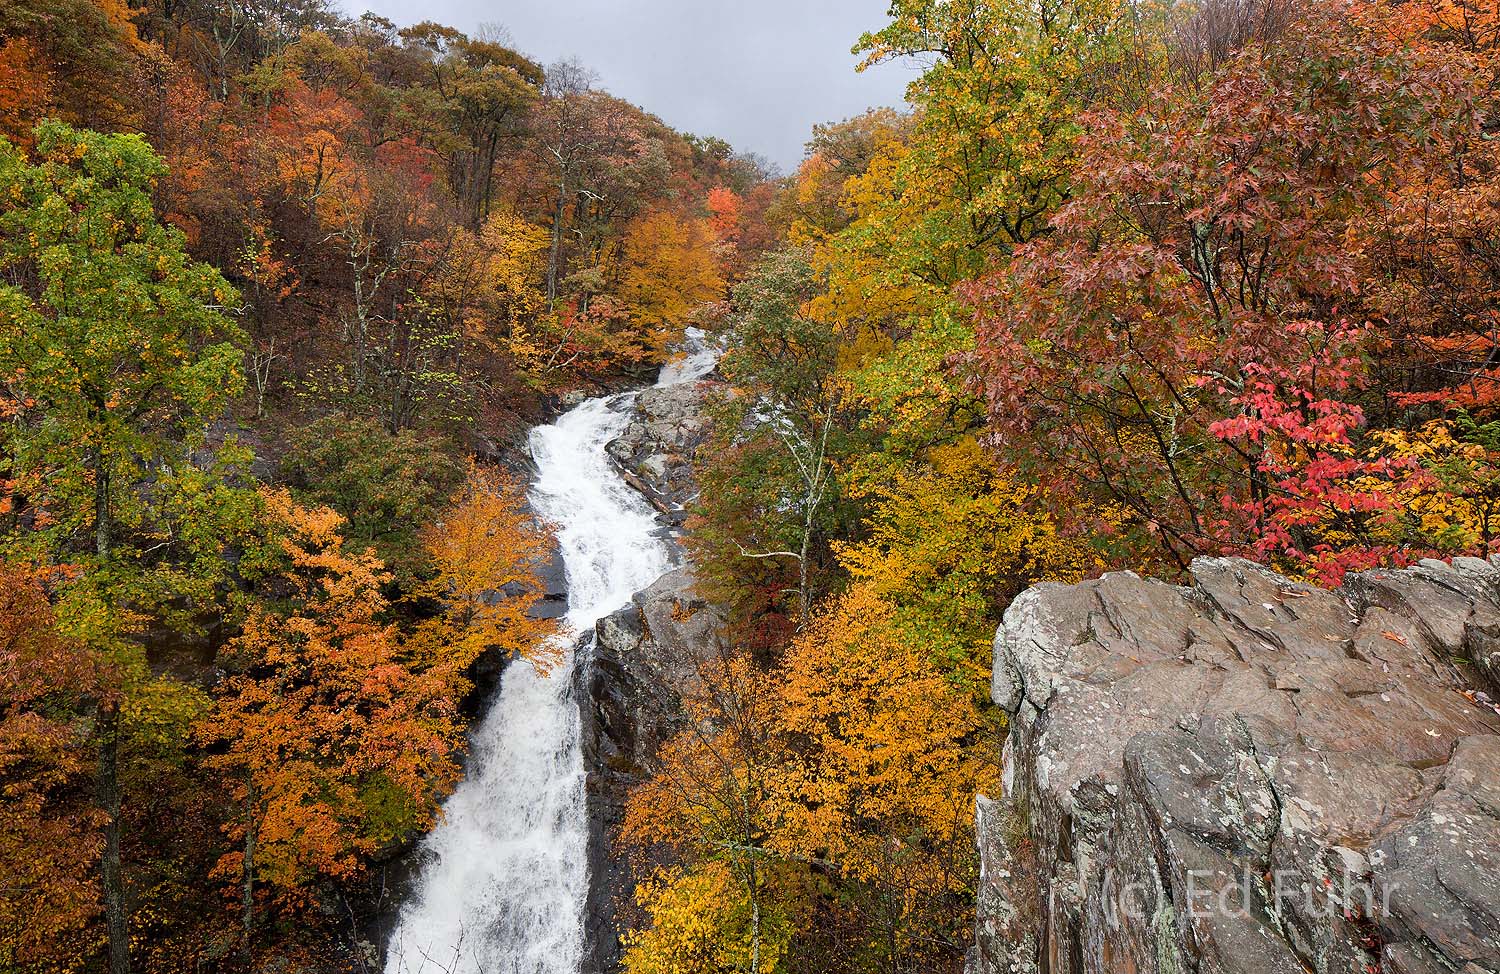 After a week of heavy rain, Whiteoak Waterfalls roars through and down this autumn canyon surrounded by autumn's fading colors...